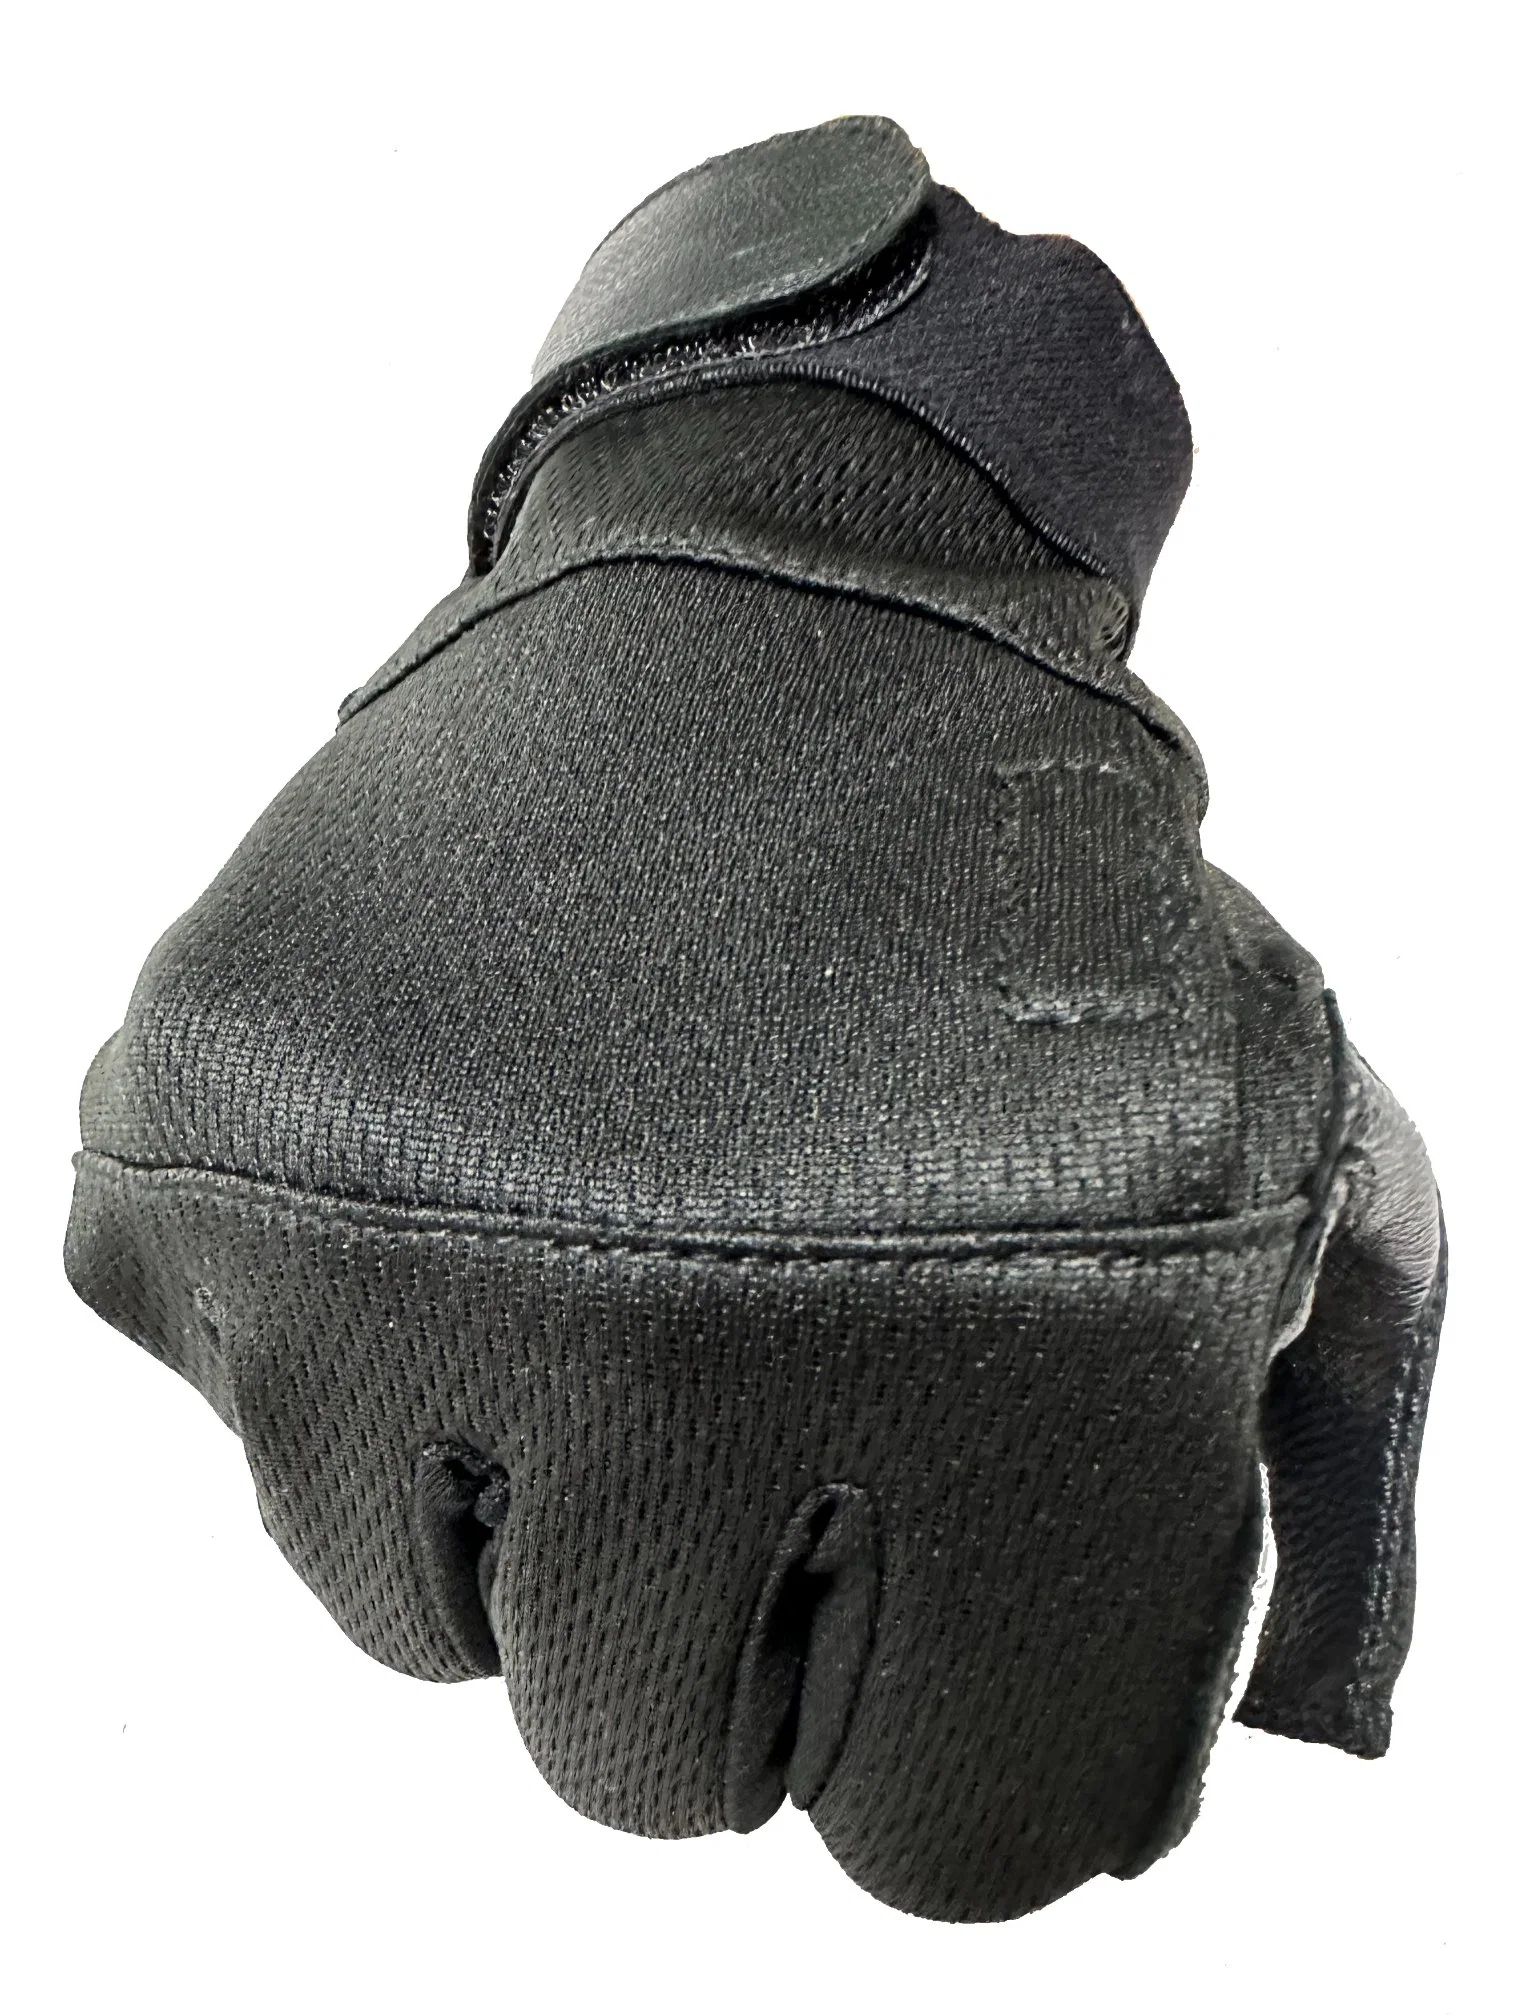 Genuine Leather Cycling Fingerless Half Finger Driving Gloves